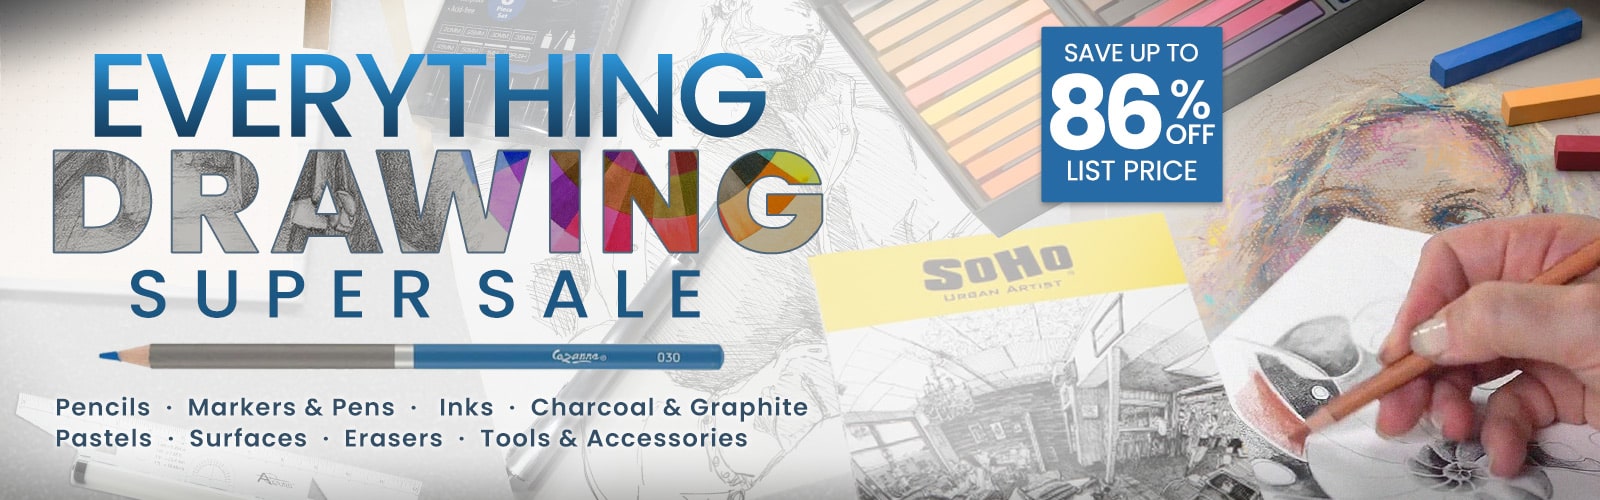 Everything Drawing Super Sale